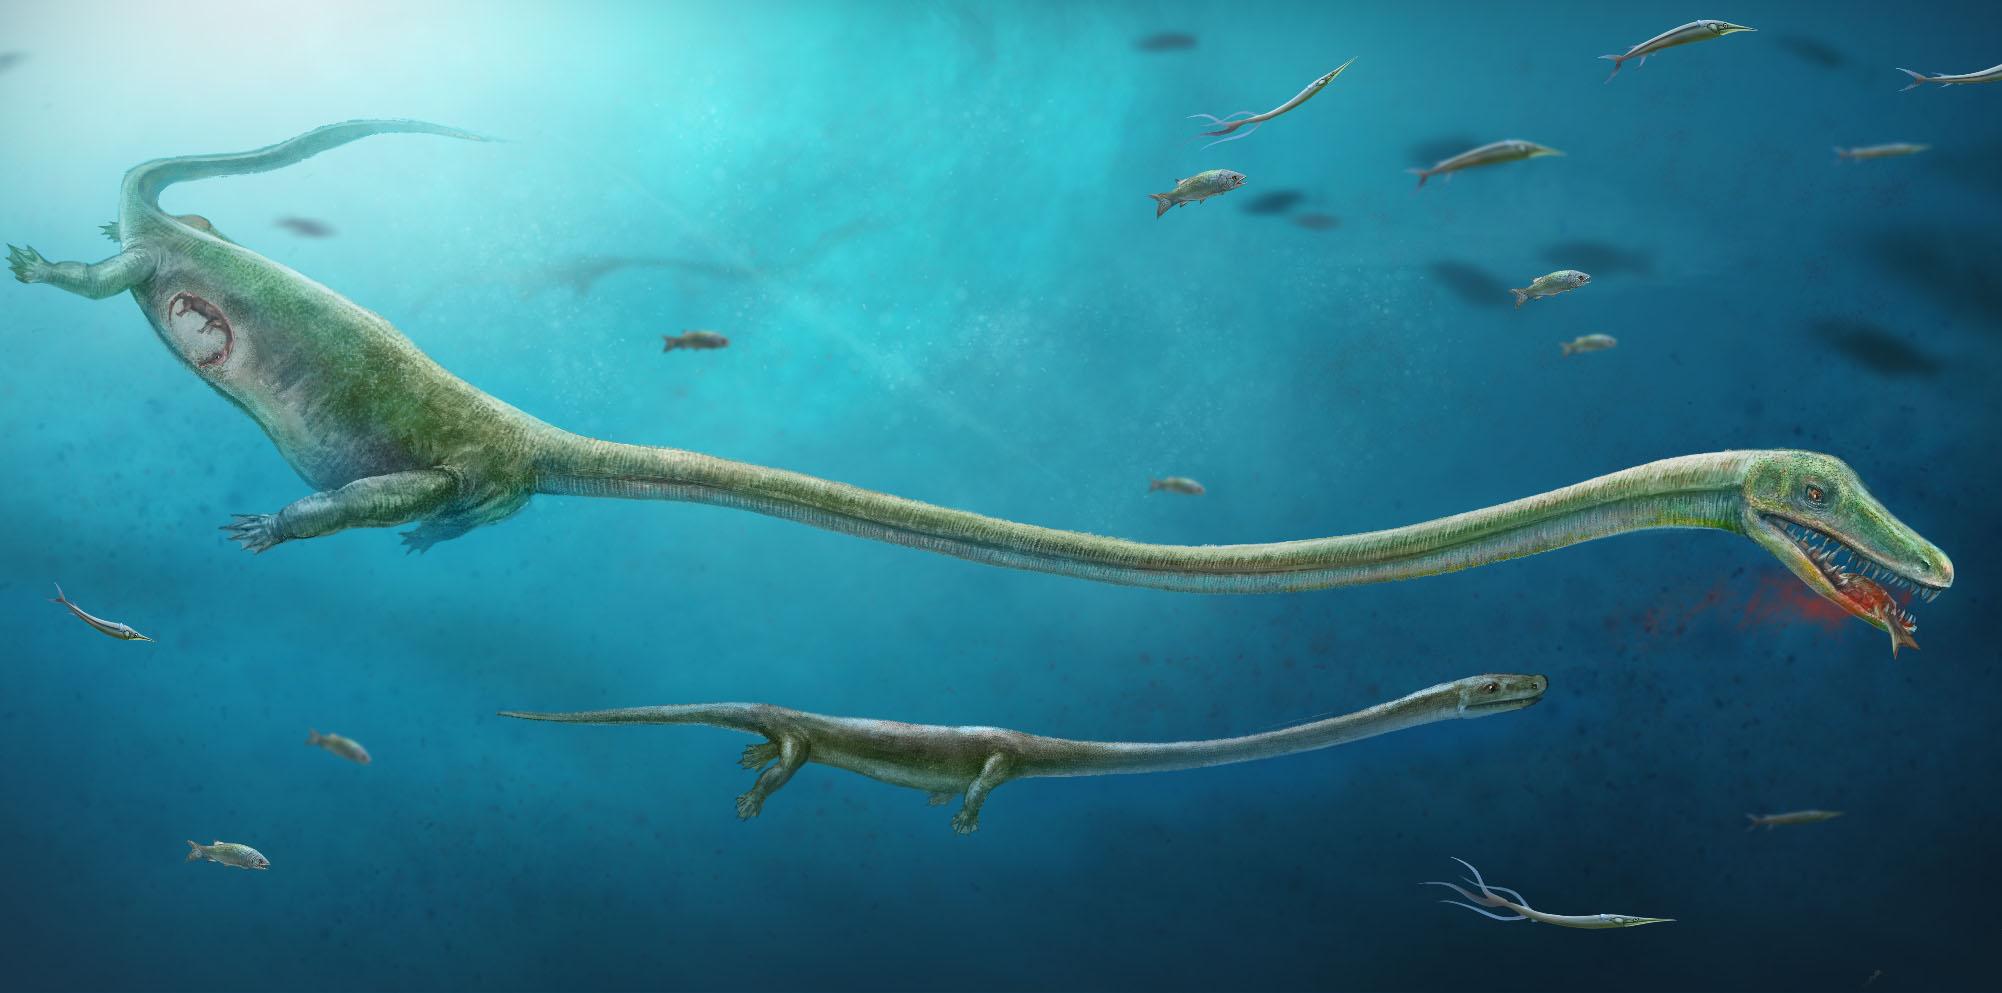 &#13;
Dinocephalosaurus had a body length of about a metre, with a neck that was nearly twice as long &#13;